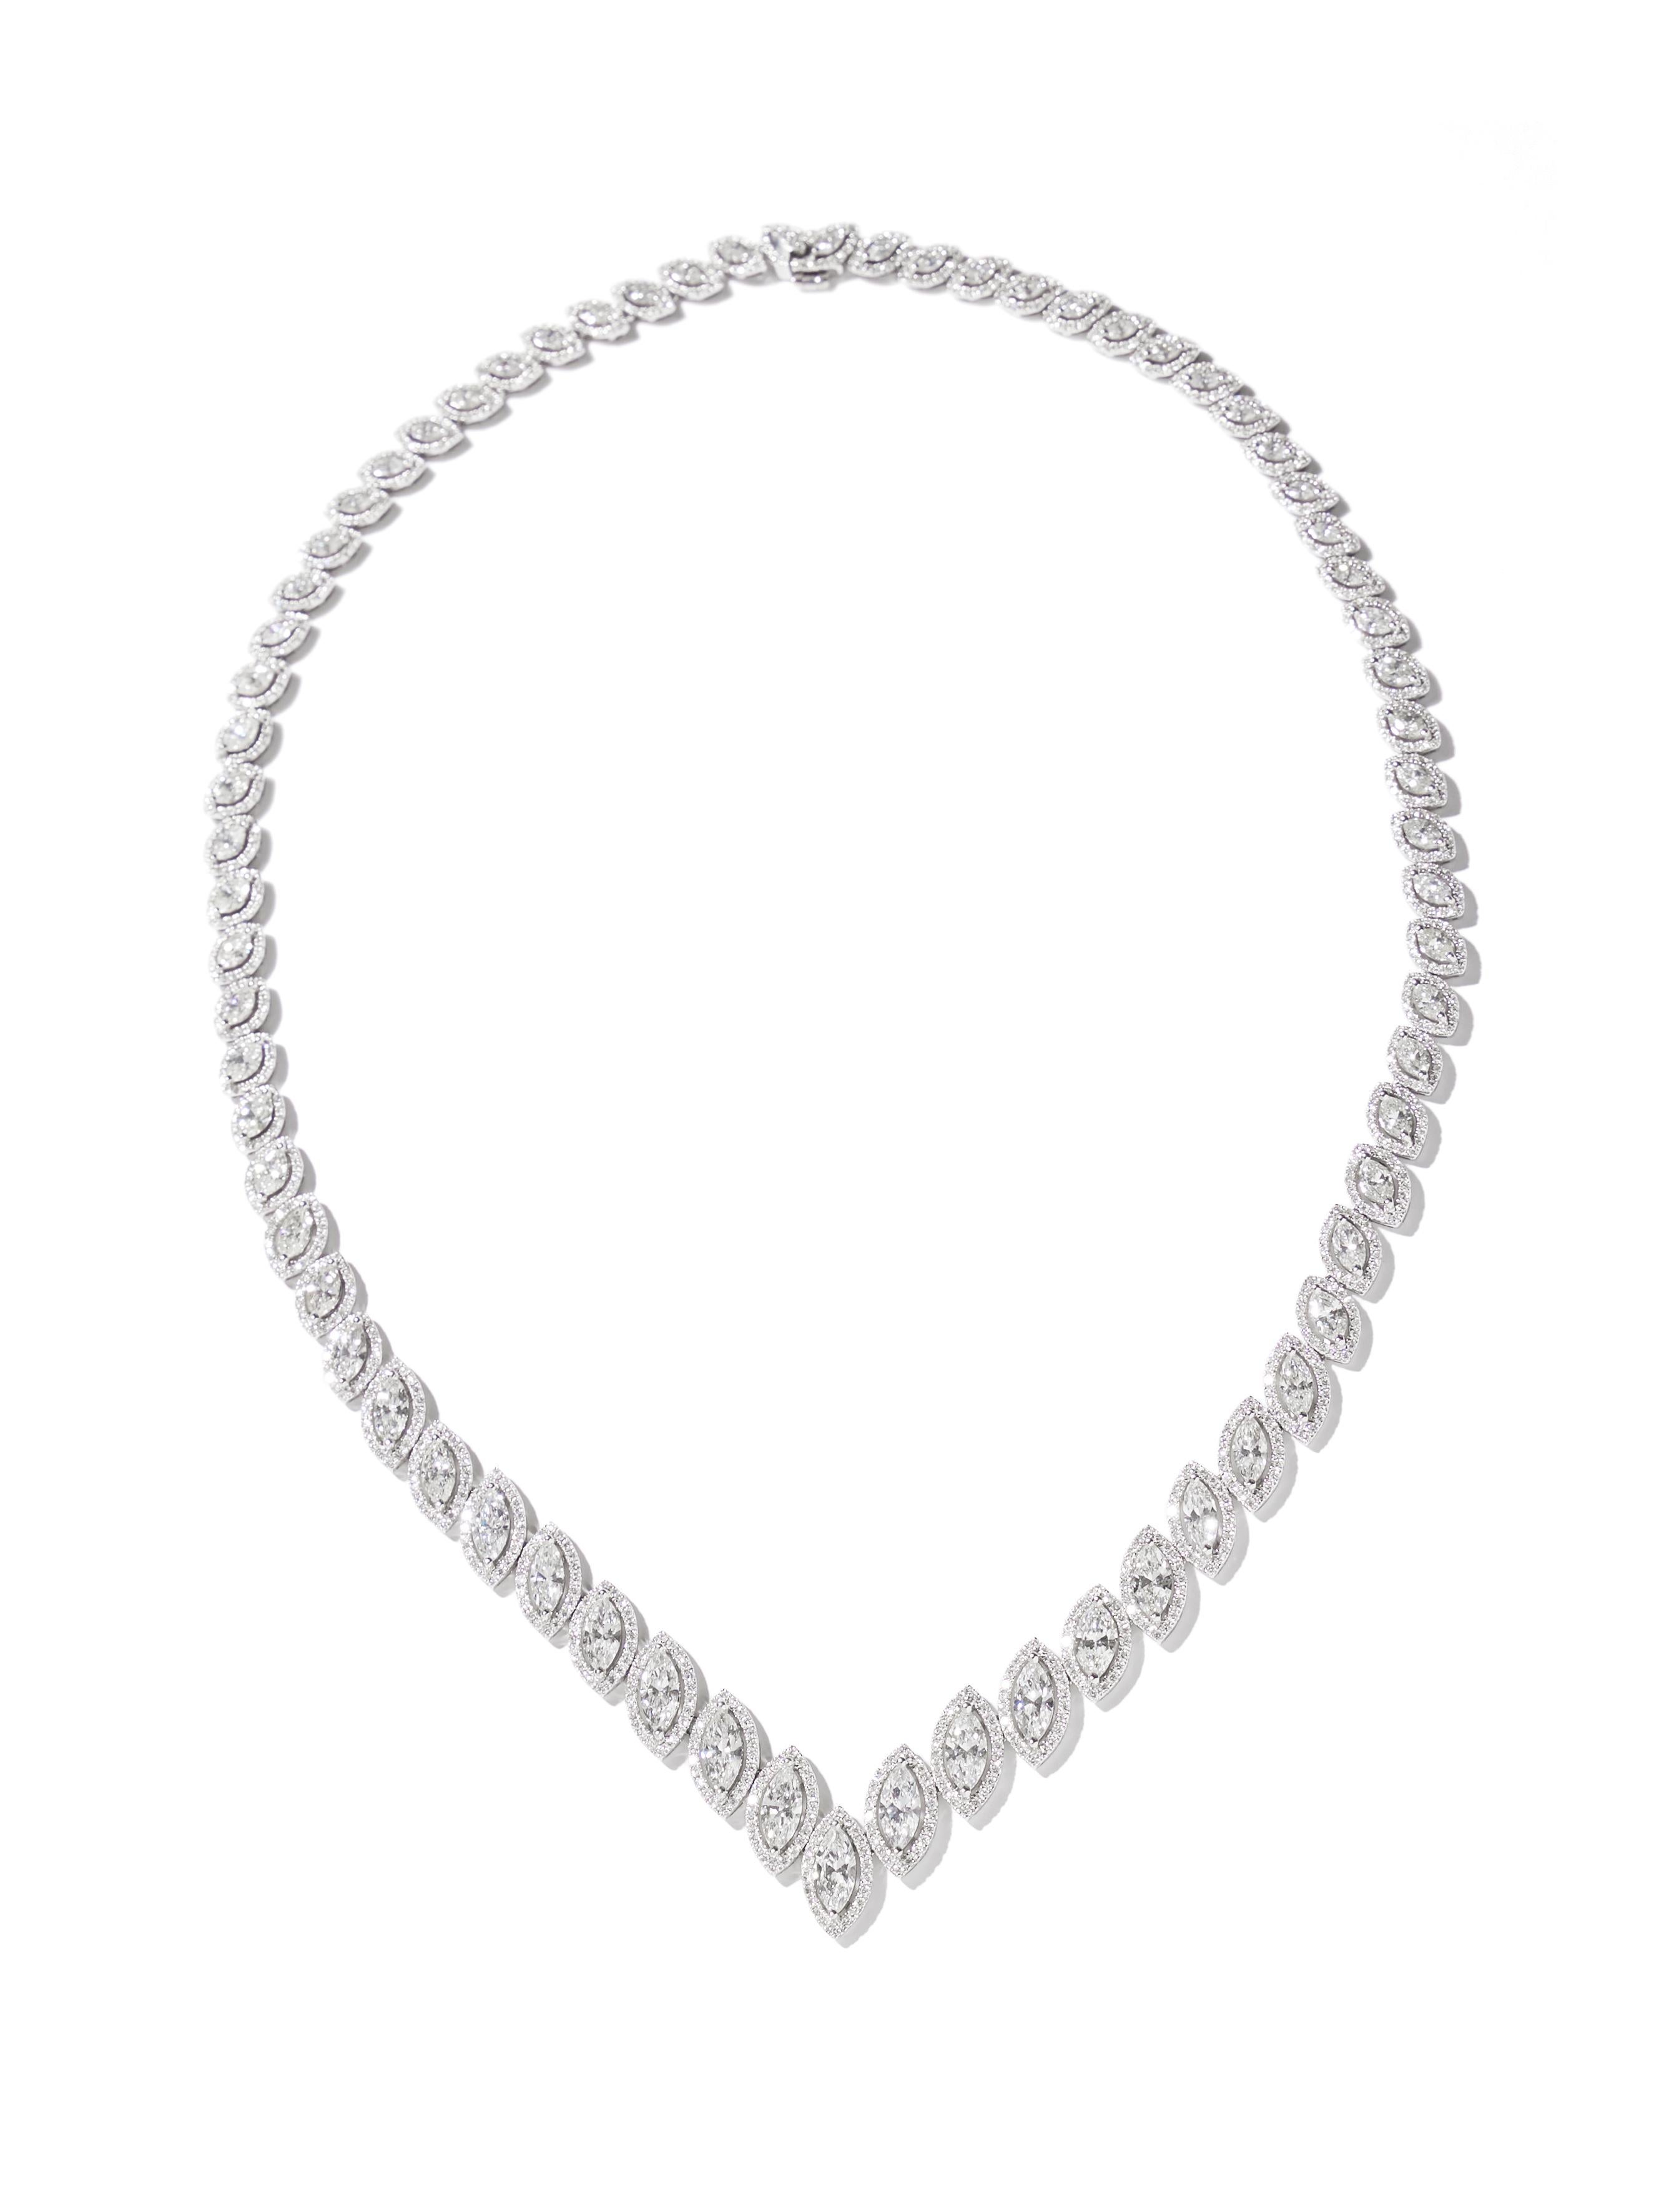 Not your ordinary diamond necklace, but a waterfall of marquise-cut diamonds of no less than 15.22cts. This necklace follows the neckline with absolute perfection, crafted in 18kt white gold.

This navette diamond necklace is a handmade eye-catcher